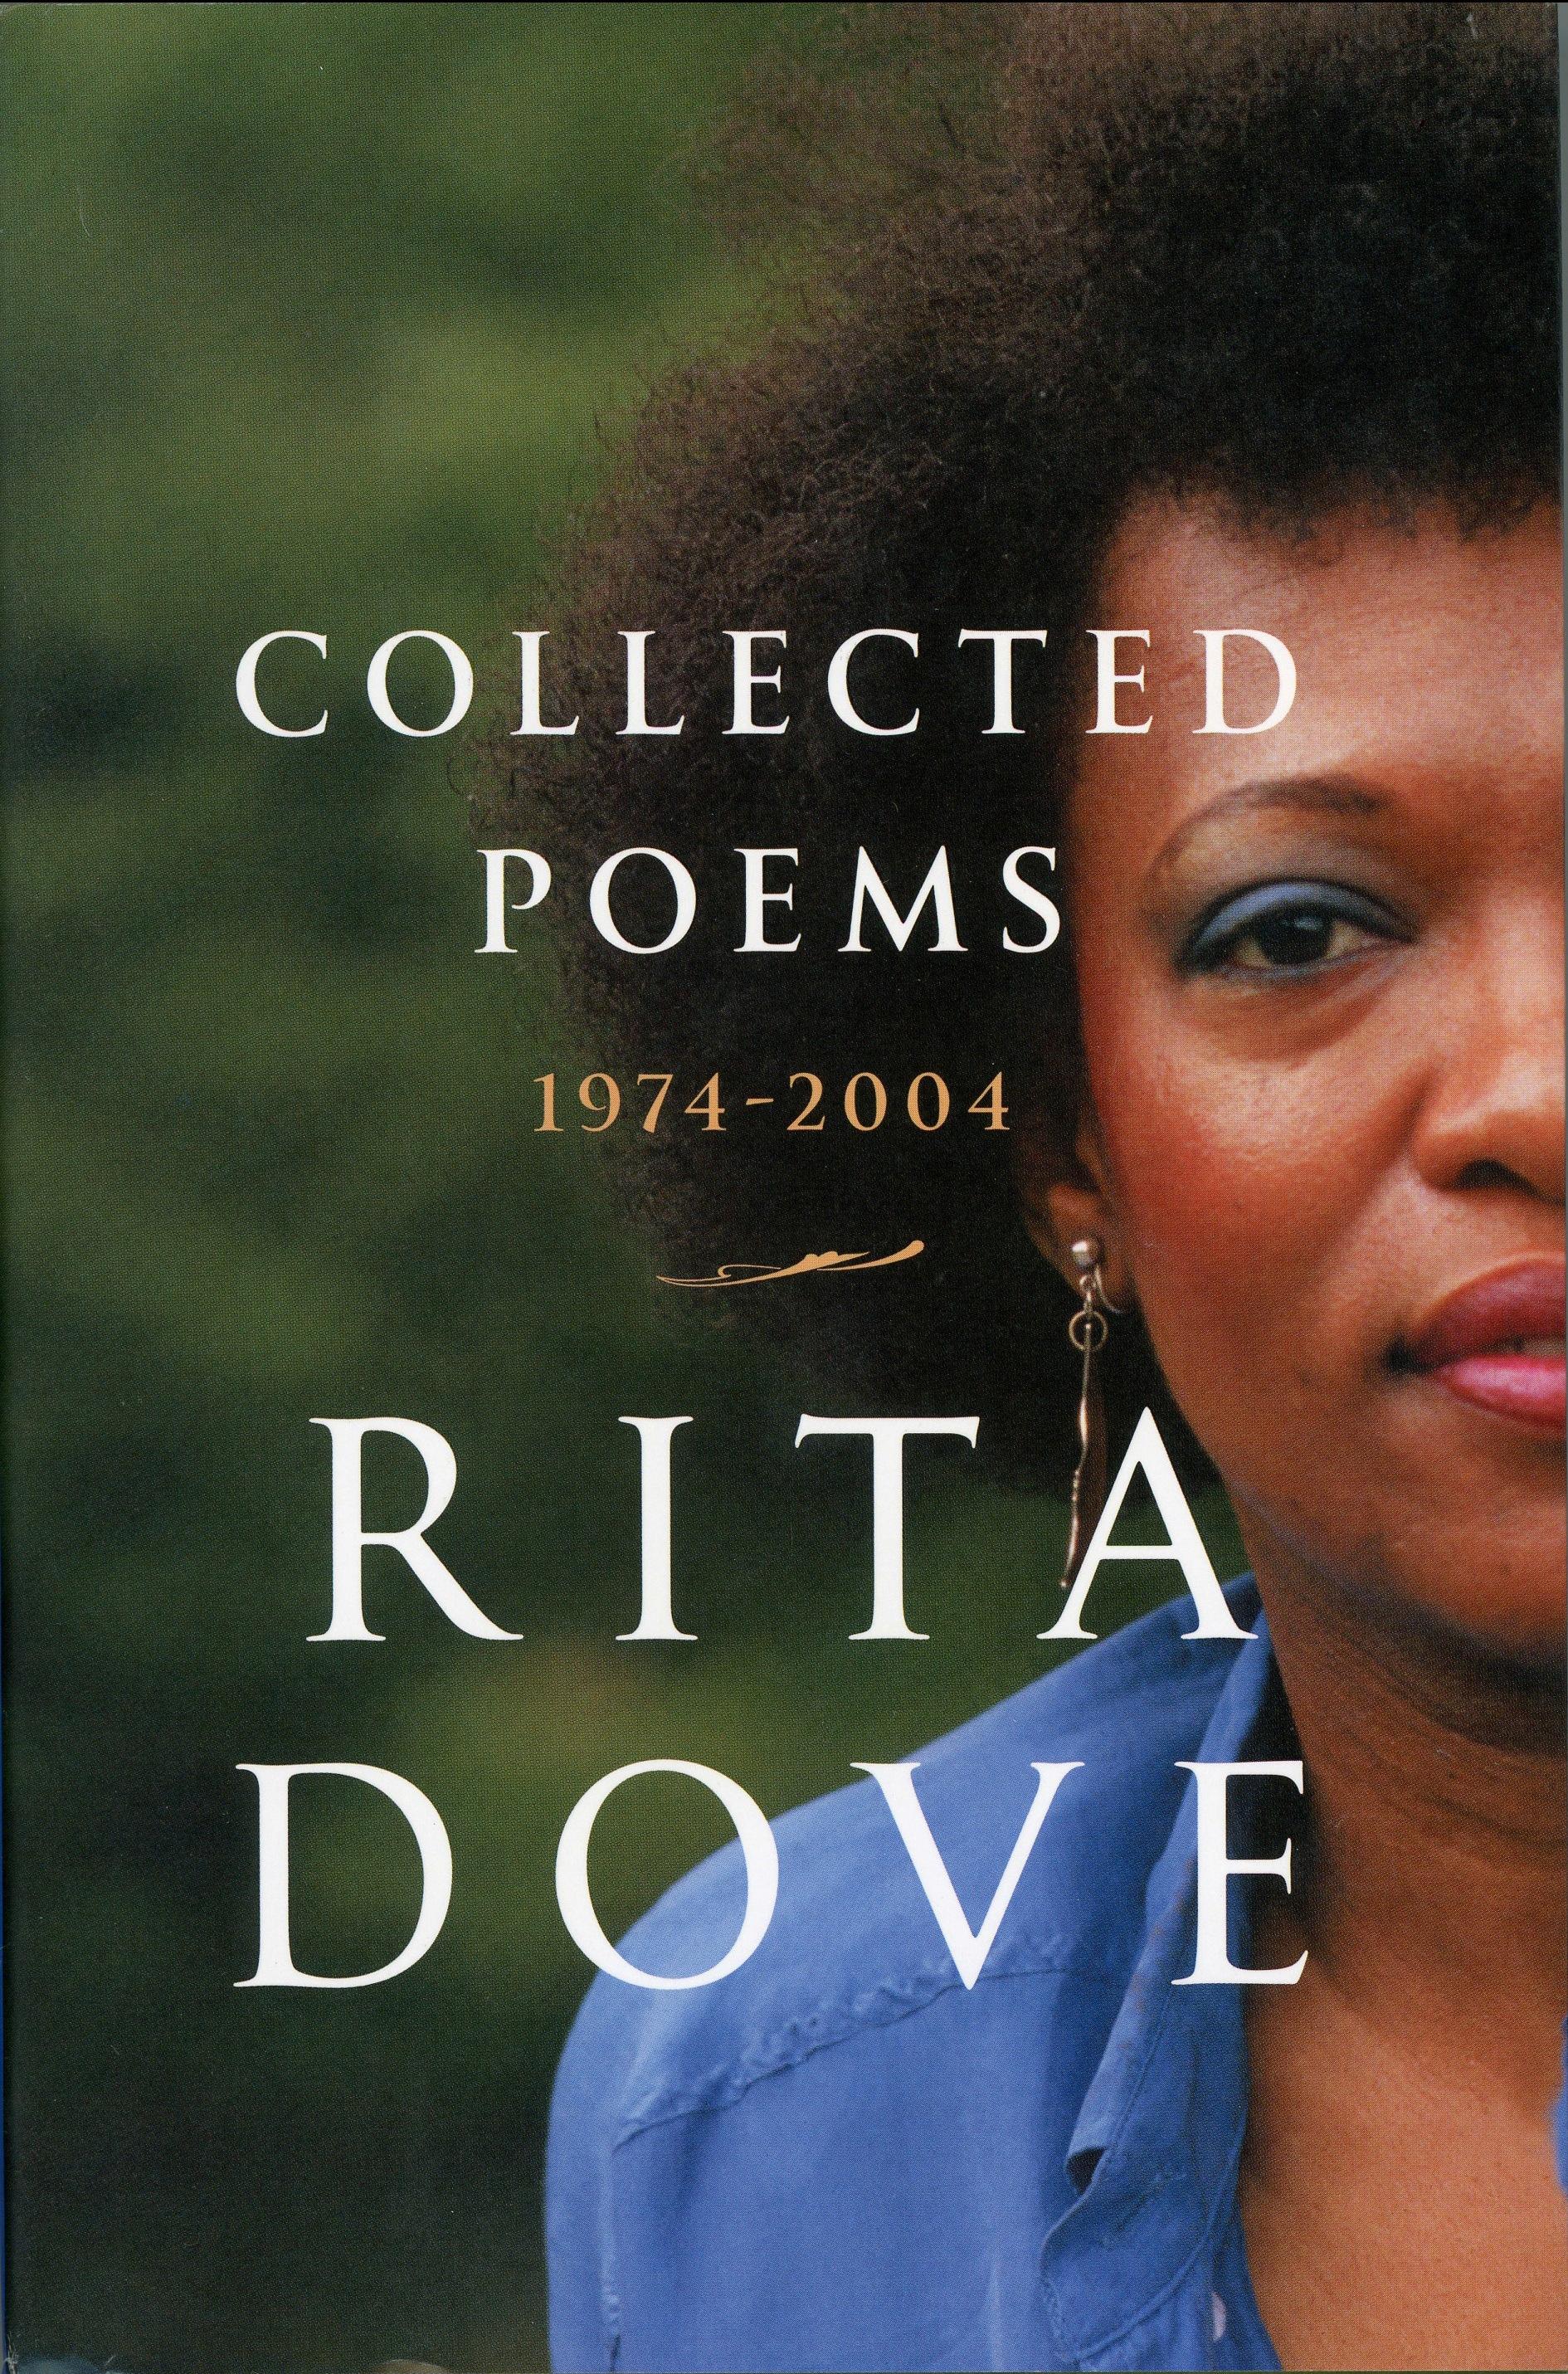 Book cover of Rita Dove's Collected Poems